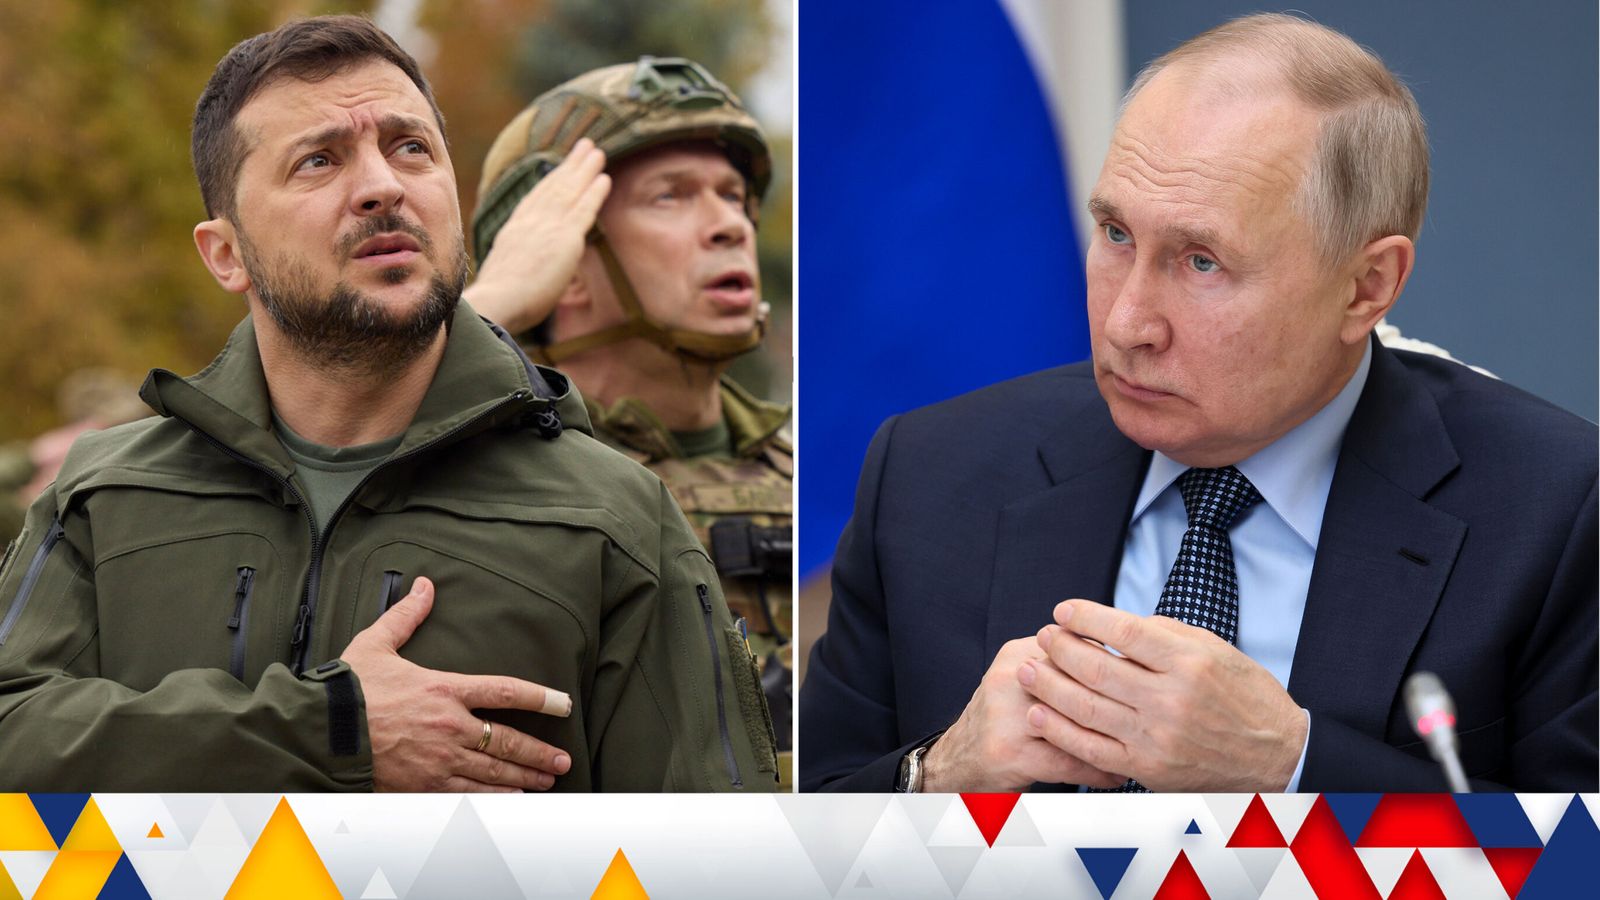 Ukraine war: What lies ahead in year two? Here is what the experts think